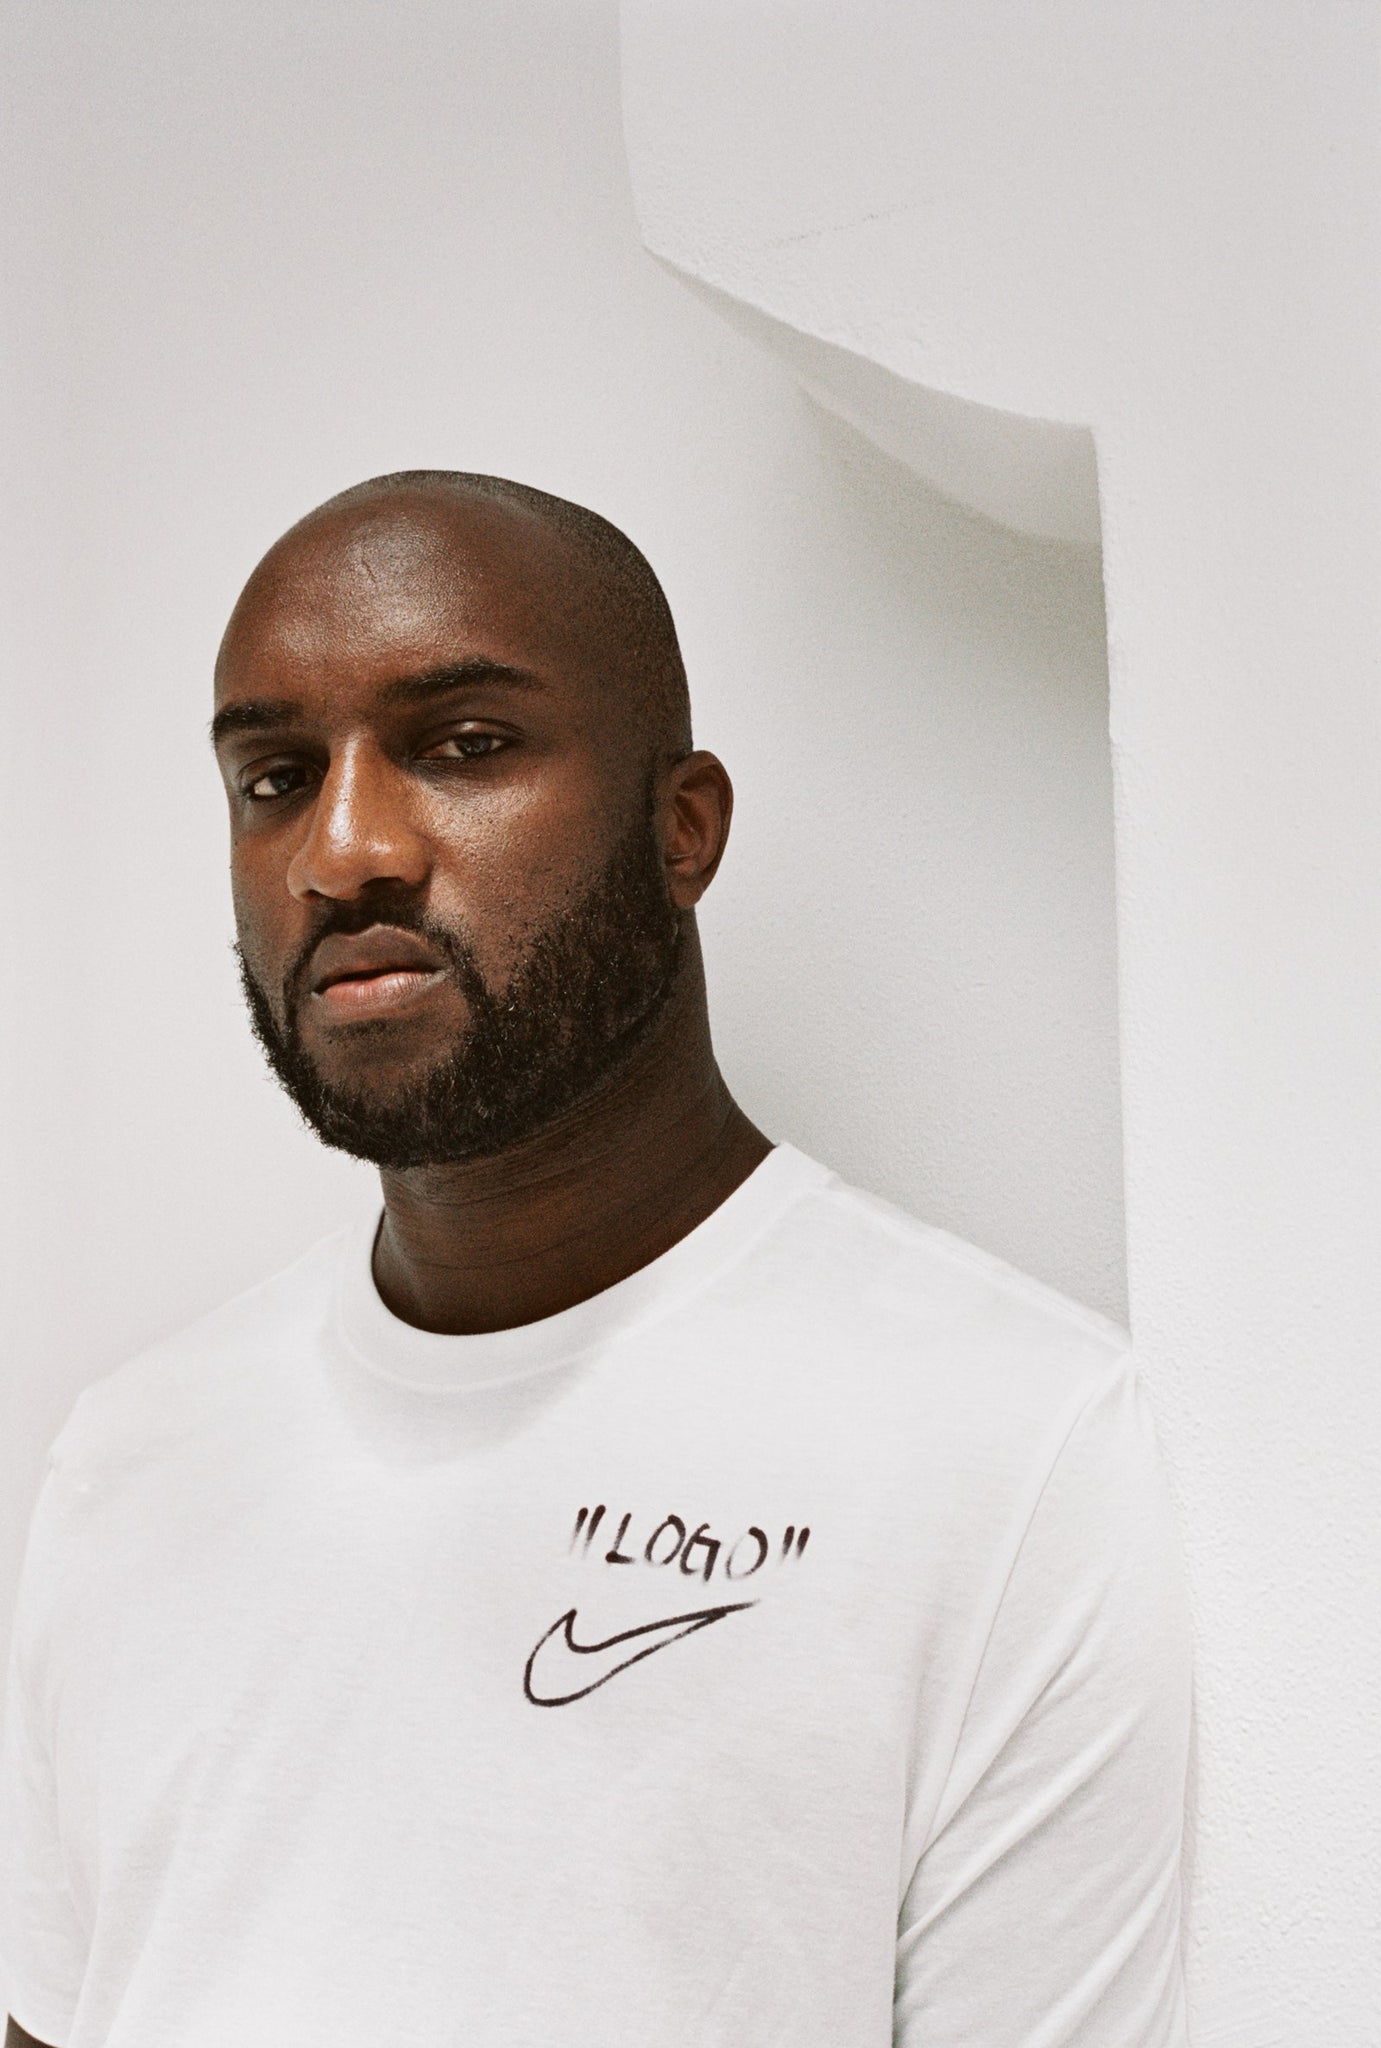 📗ICONS: Something's Off Virgil Abloh IN HAND Book Nike Off-White